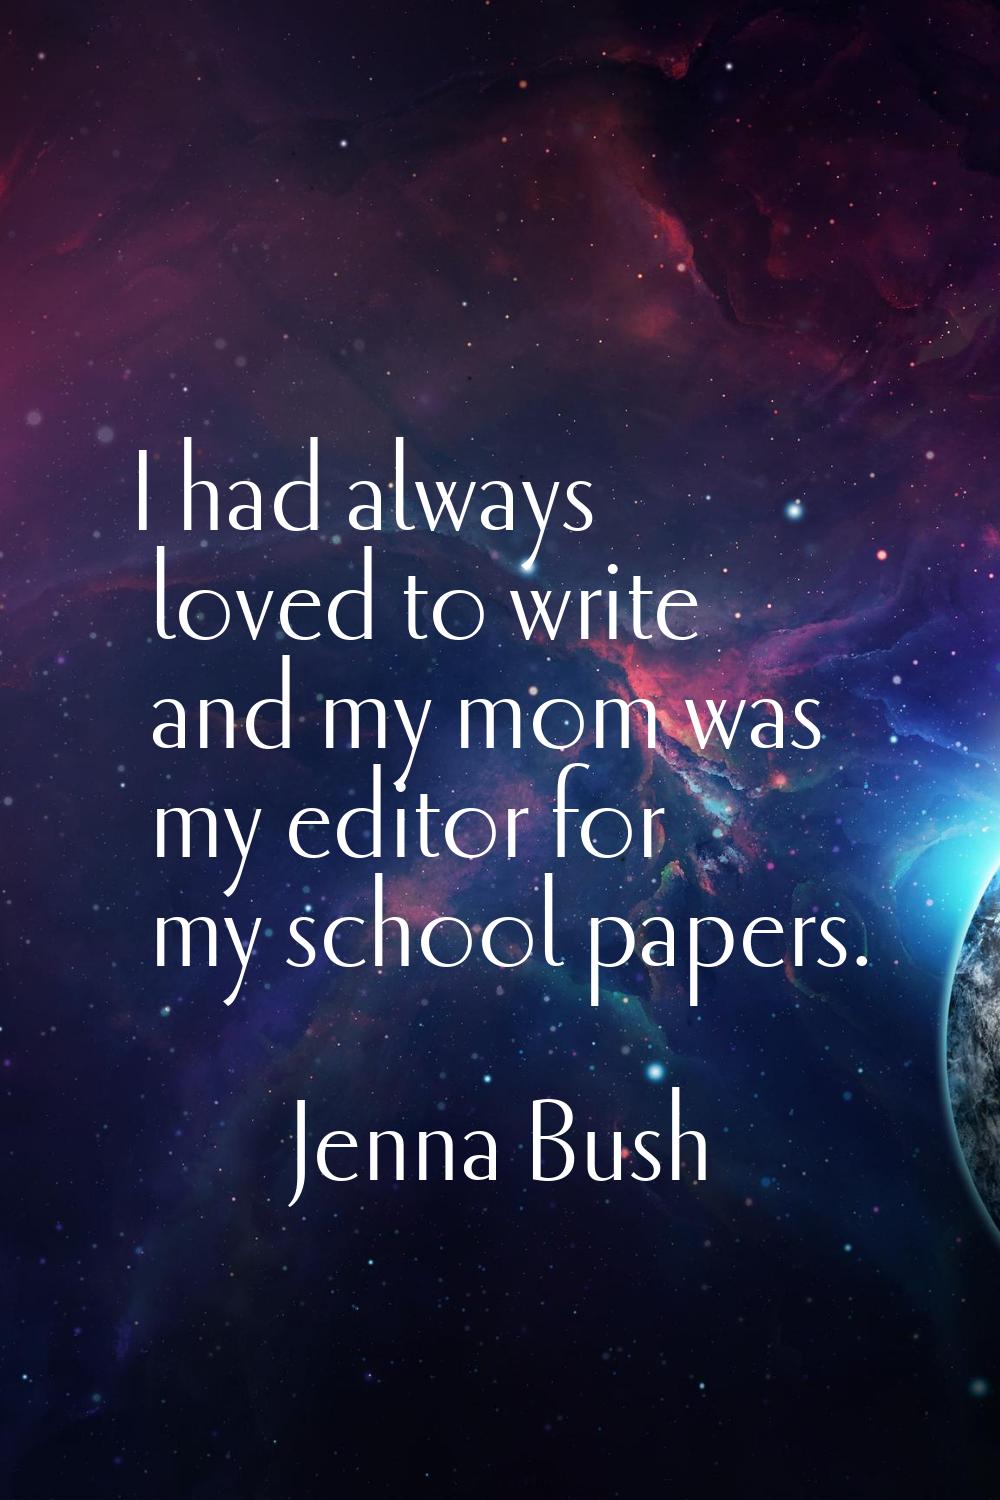 I had always loved to write and my mom was my editor for my school papers.